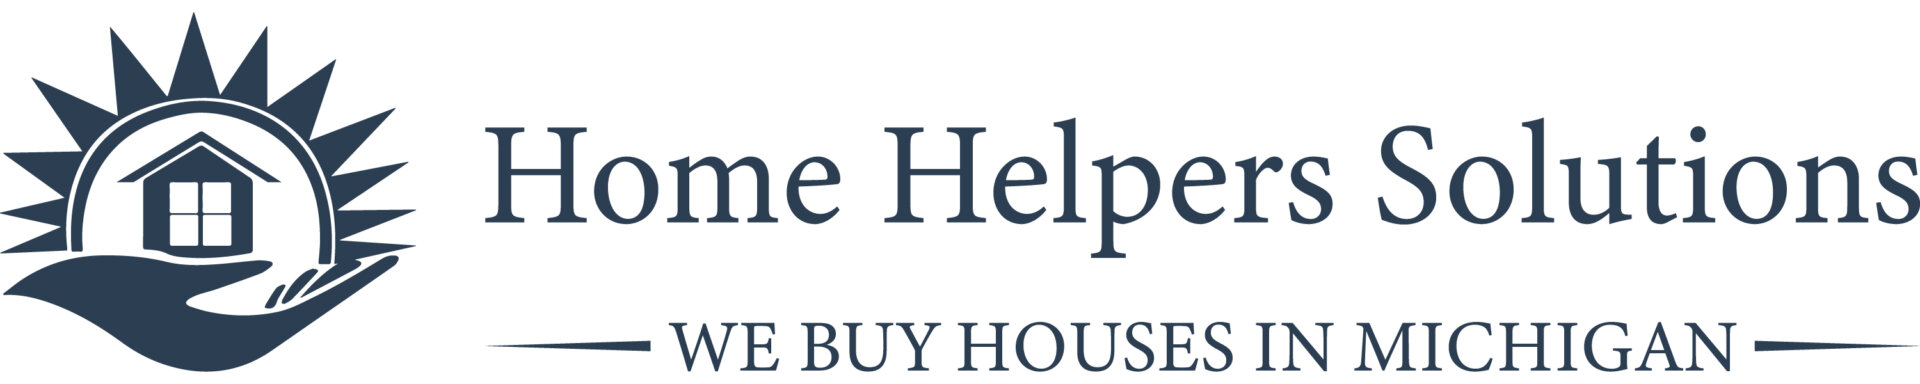 Home Helpers Solutions  logo